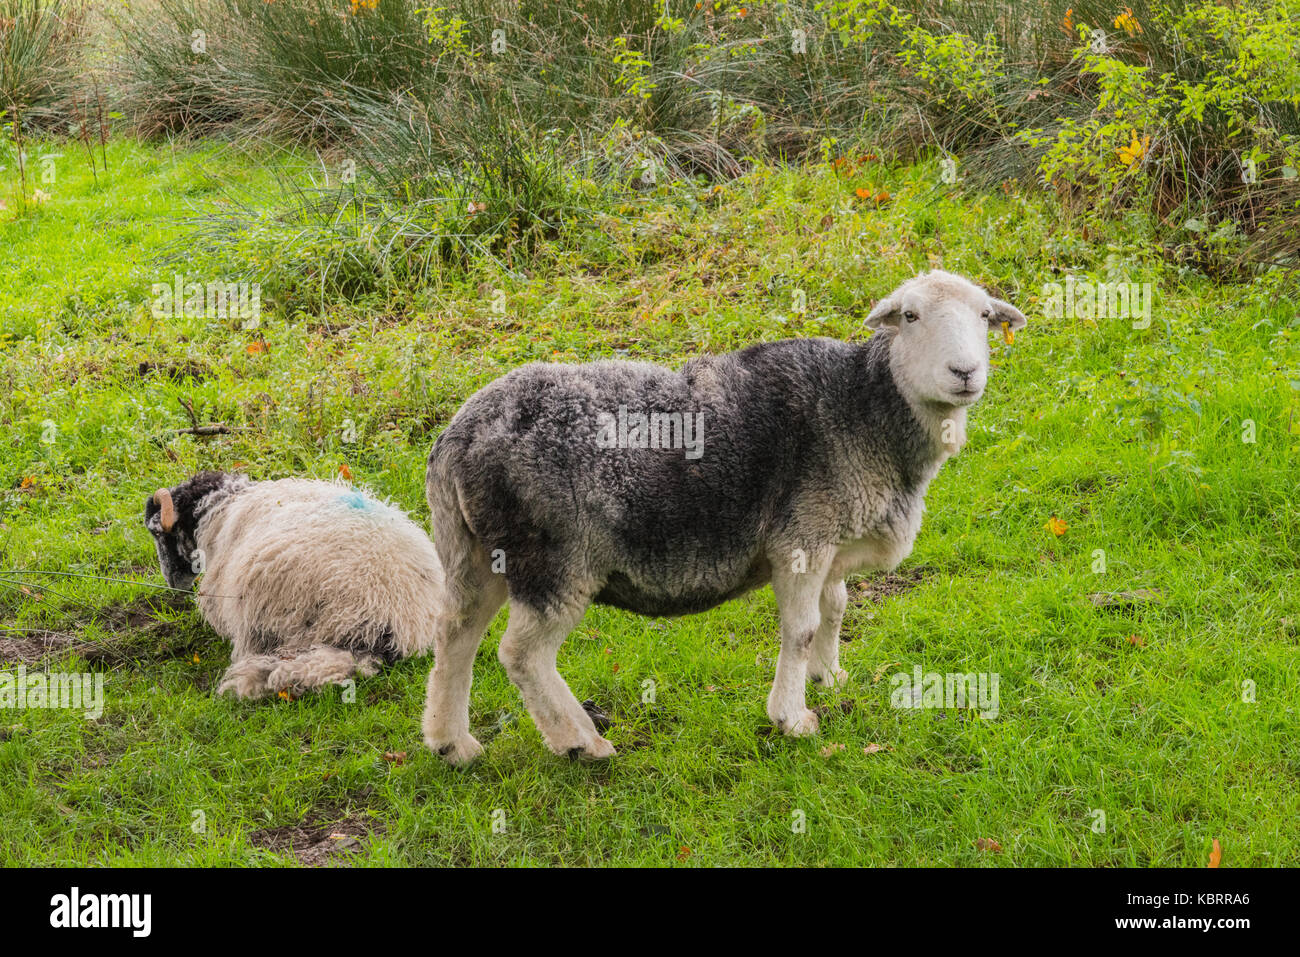 The hardy Cumbrian Herdwick sheep grazing in a field in the English Lake District National Park, England, UK Stock Photo